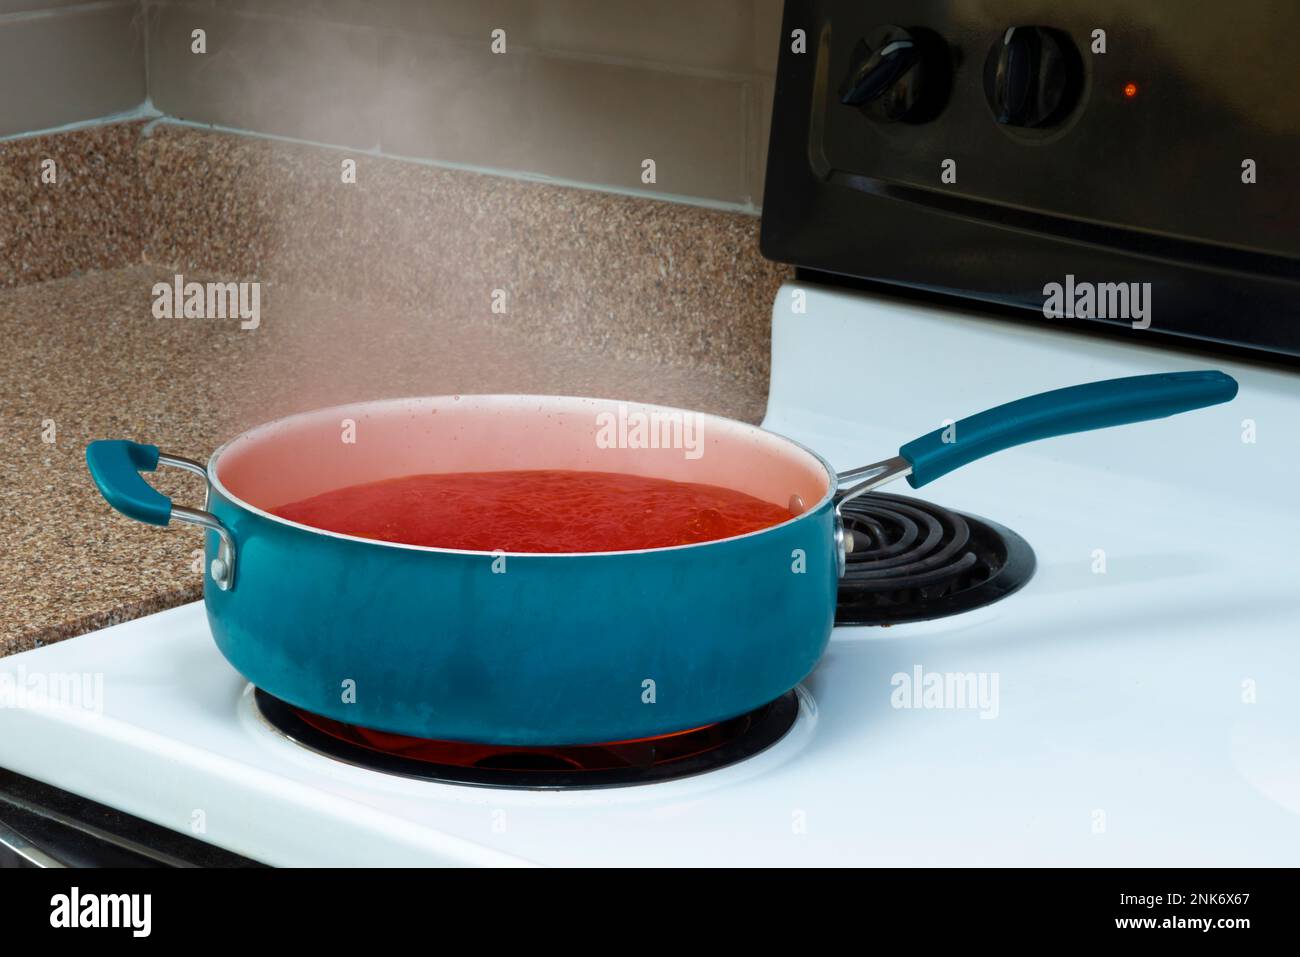 Horizontal shot of a blue pot on a stove top holding steaming tomato soup. Stock Photo